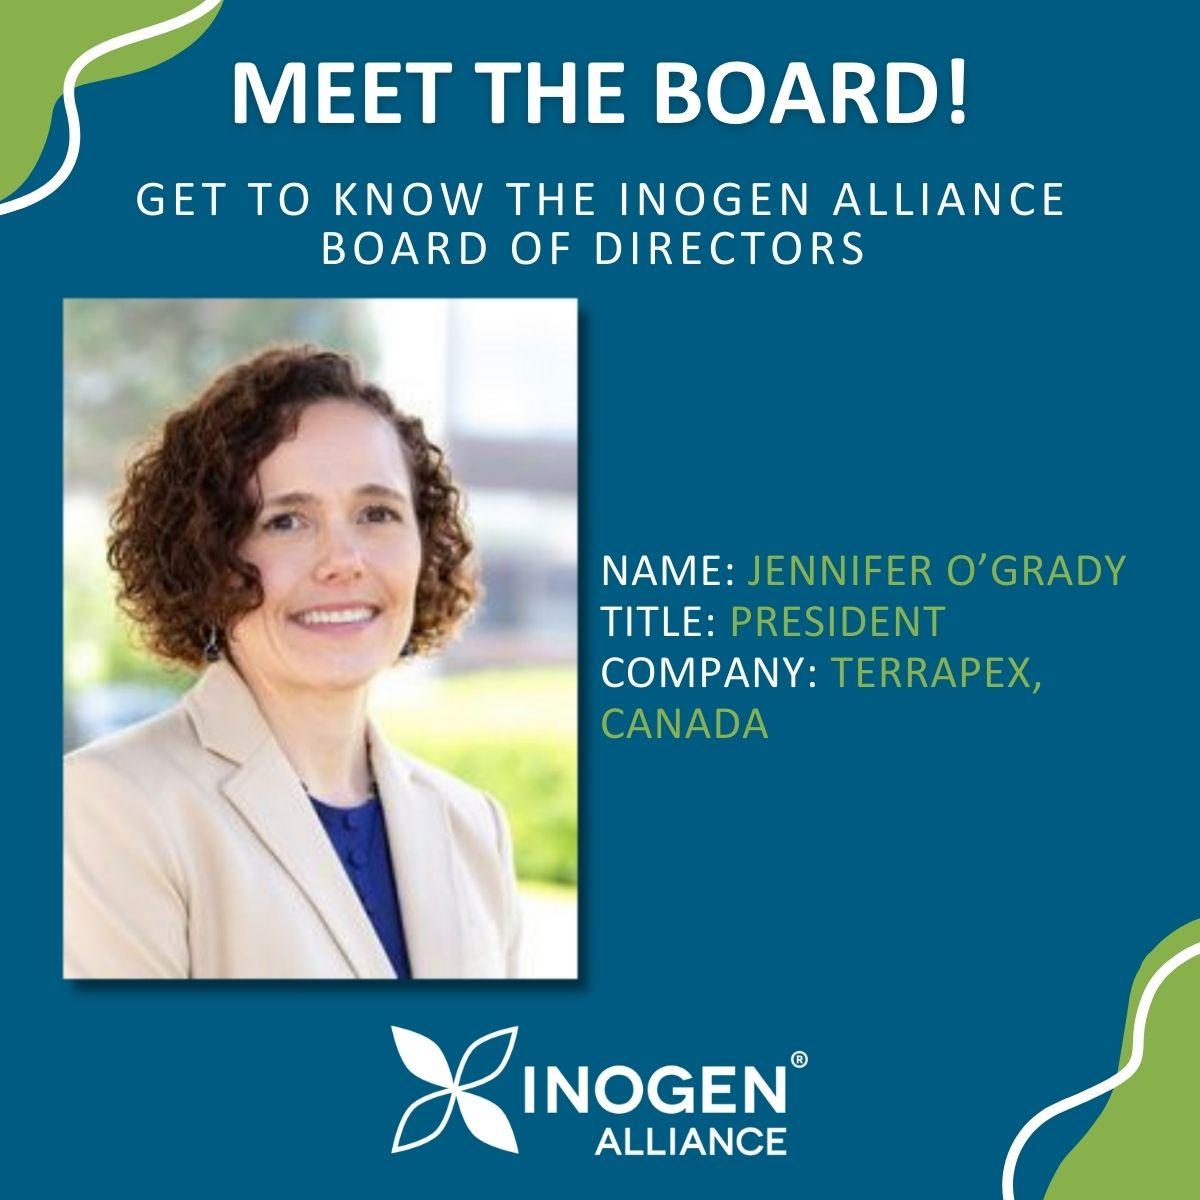 Headshot of Jennifer with the text, "Meet the Board! Get to know the Inogen Alliance board of directors. Name: Jennifer O'Grady. Title: President. Company: Terrapex, Canada"